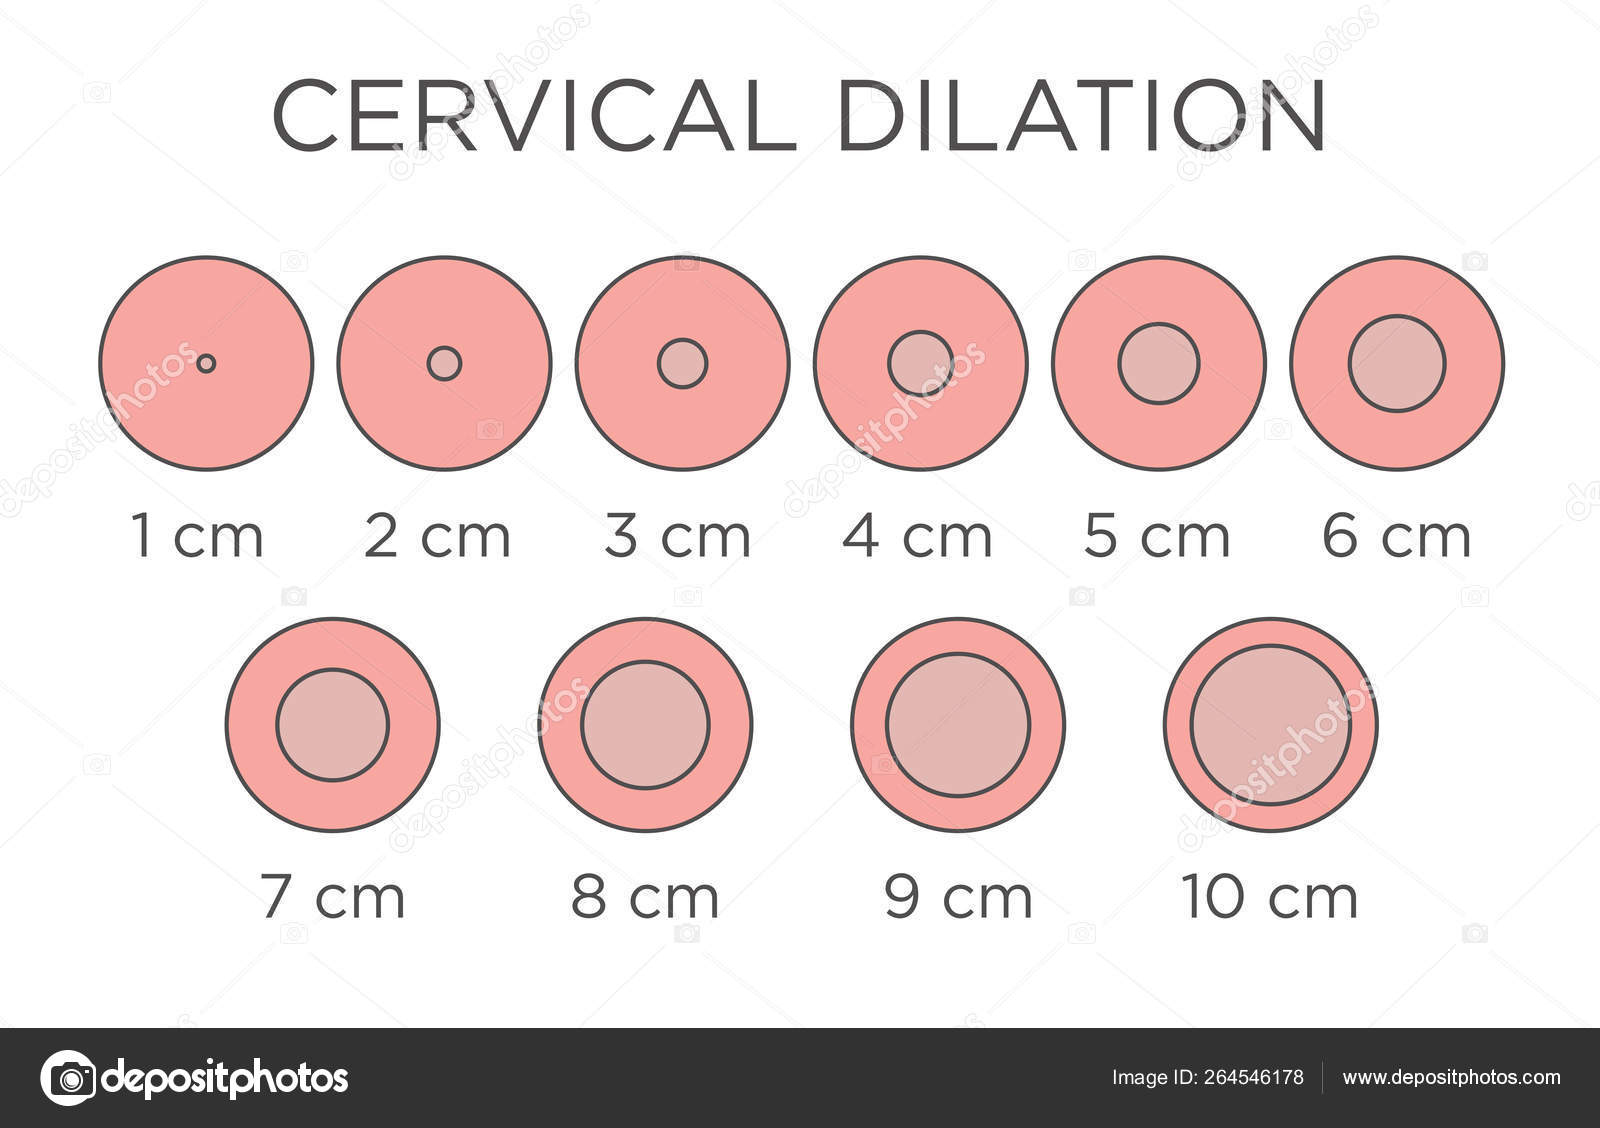 Effacement And Dilation Of The Cervix Chart